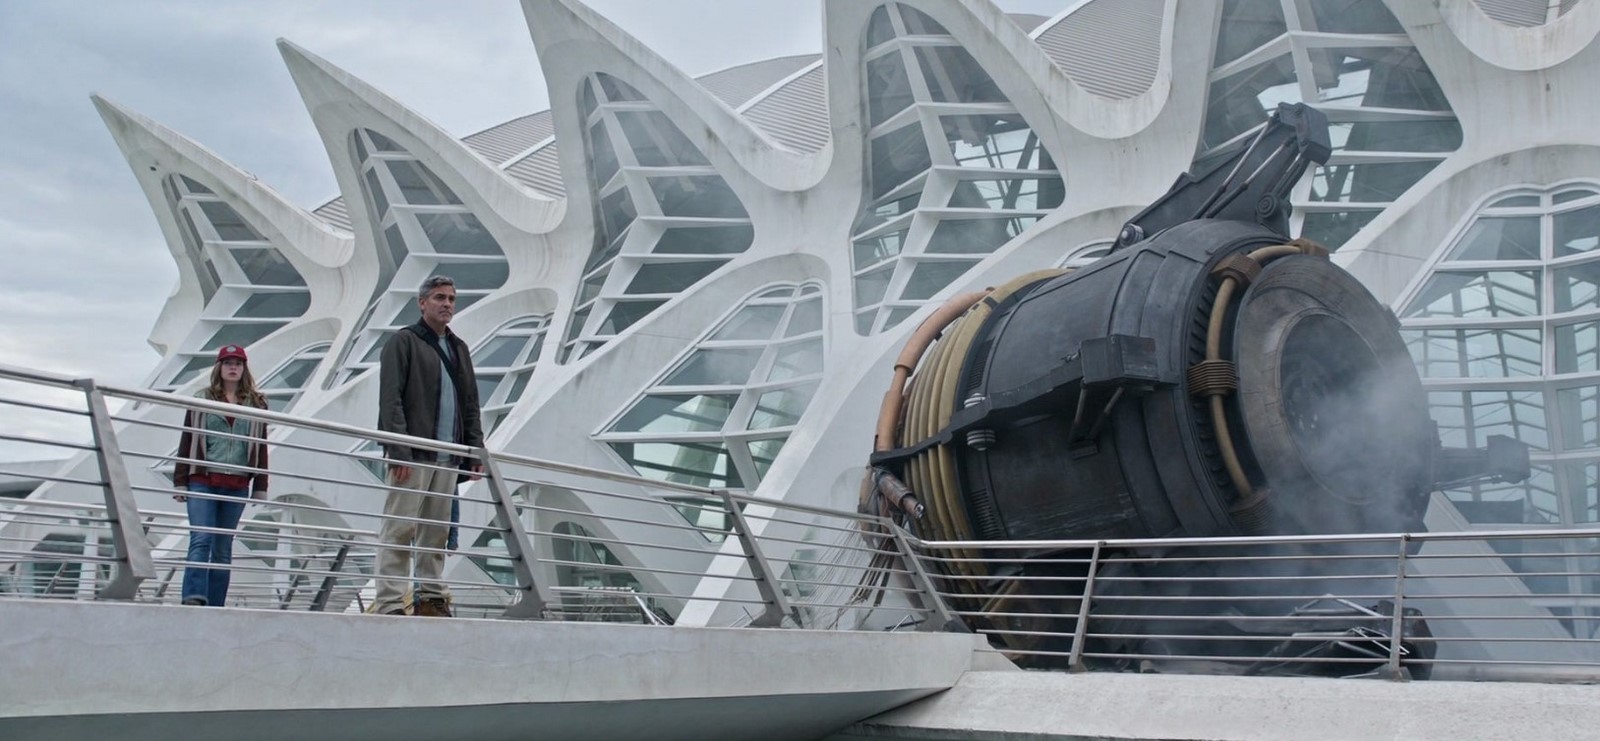 An architectural review of Tomorrowland - Sheet10